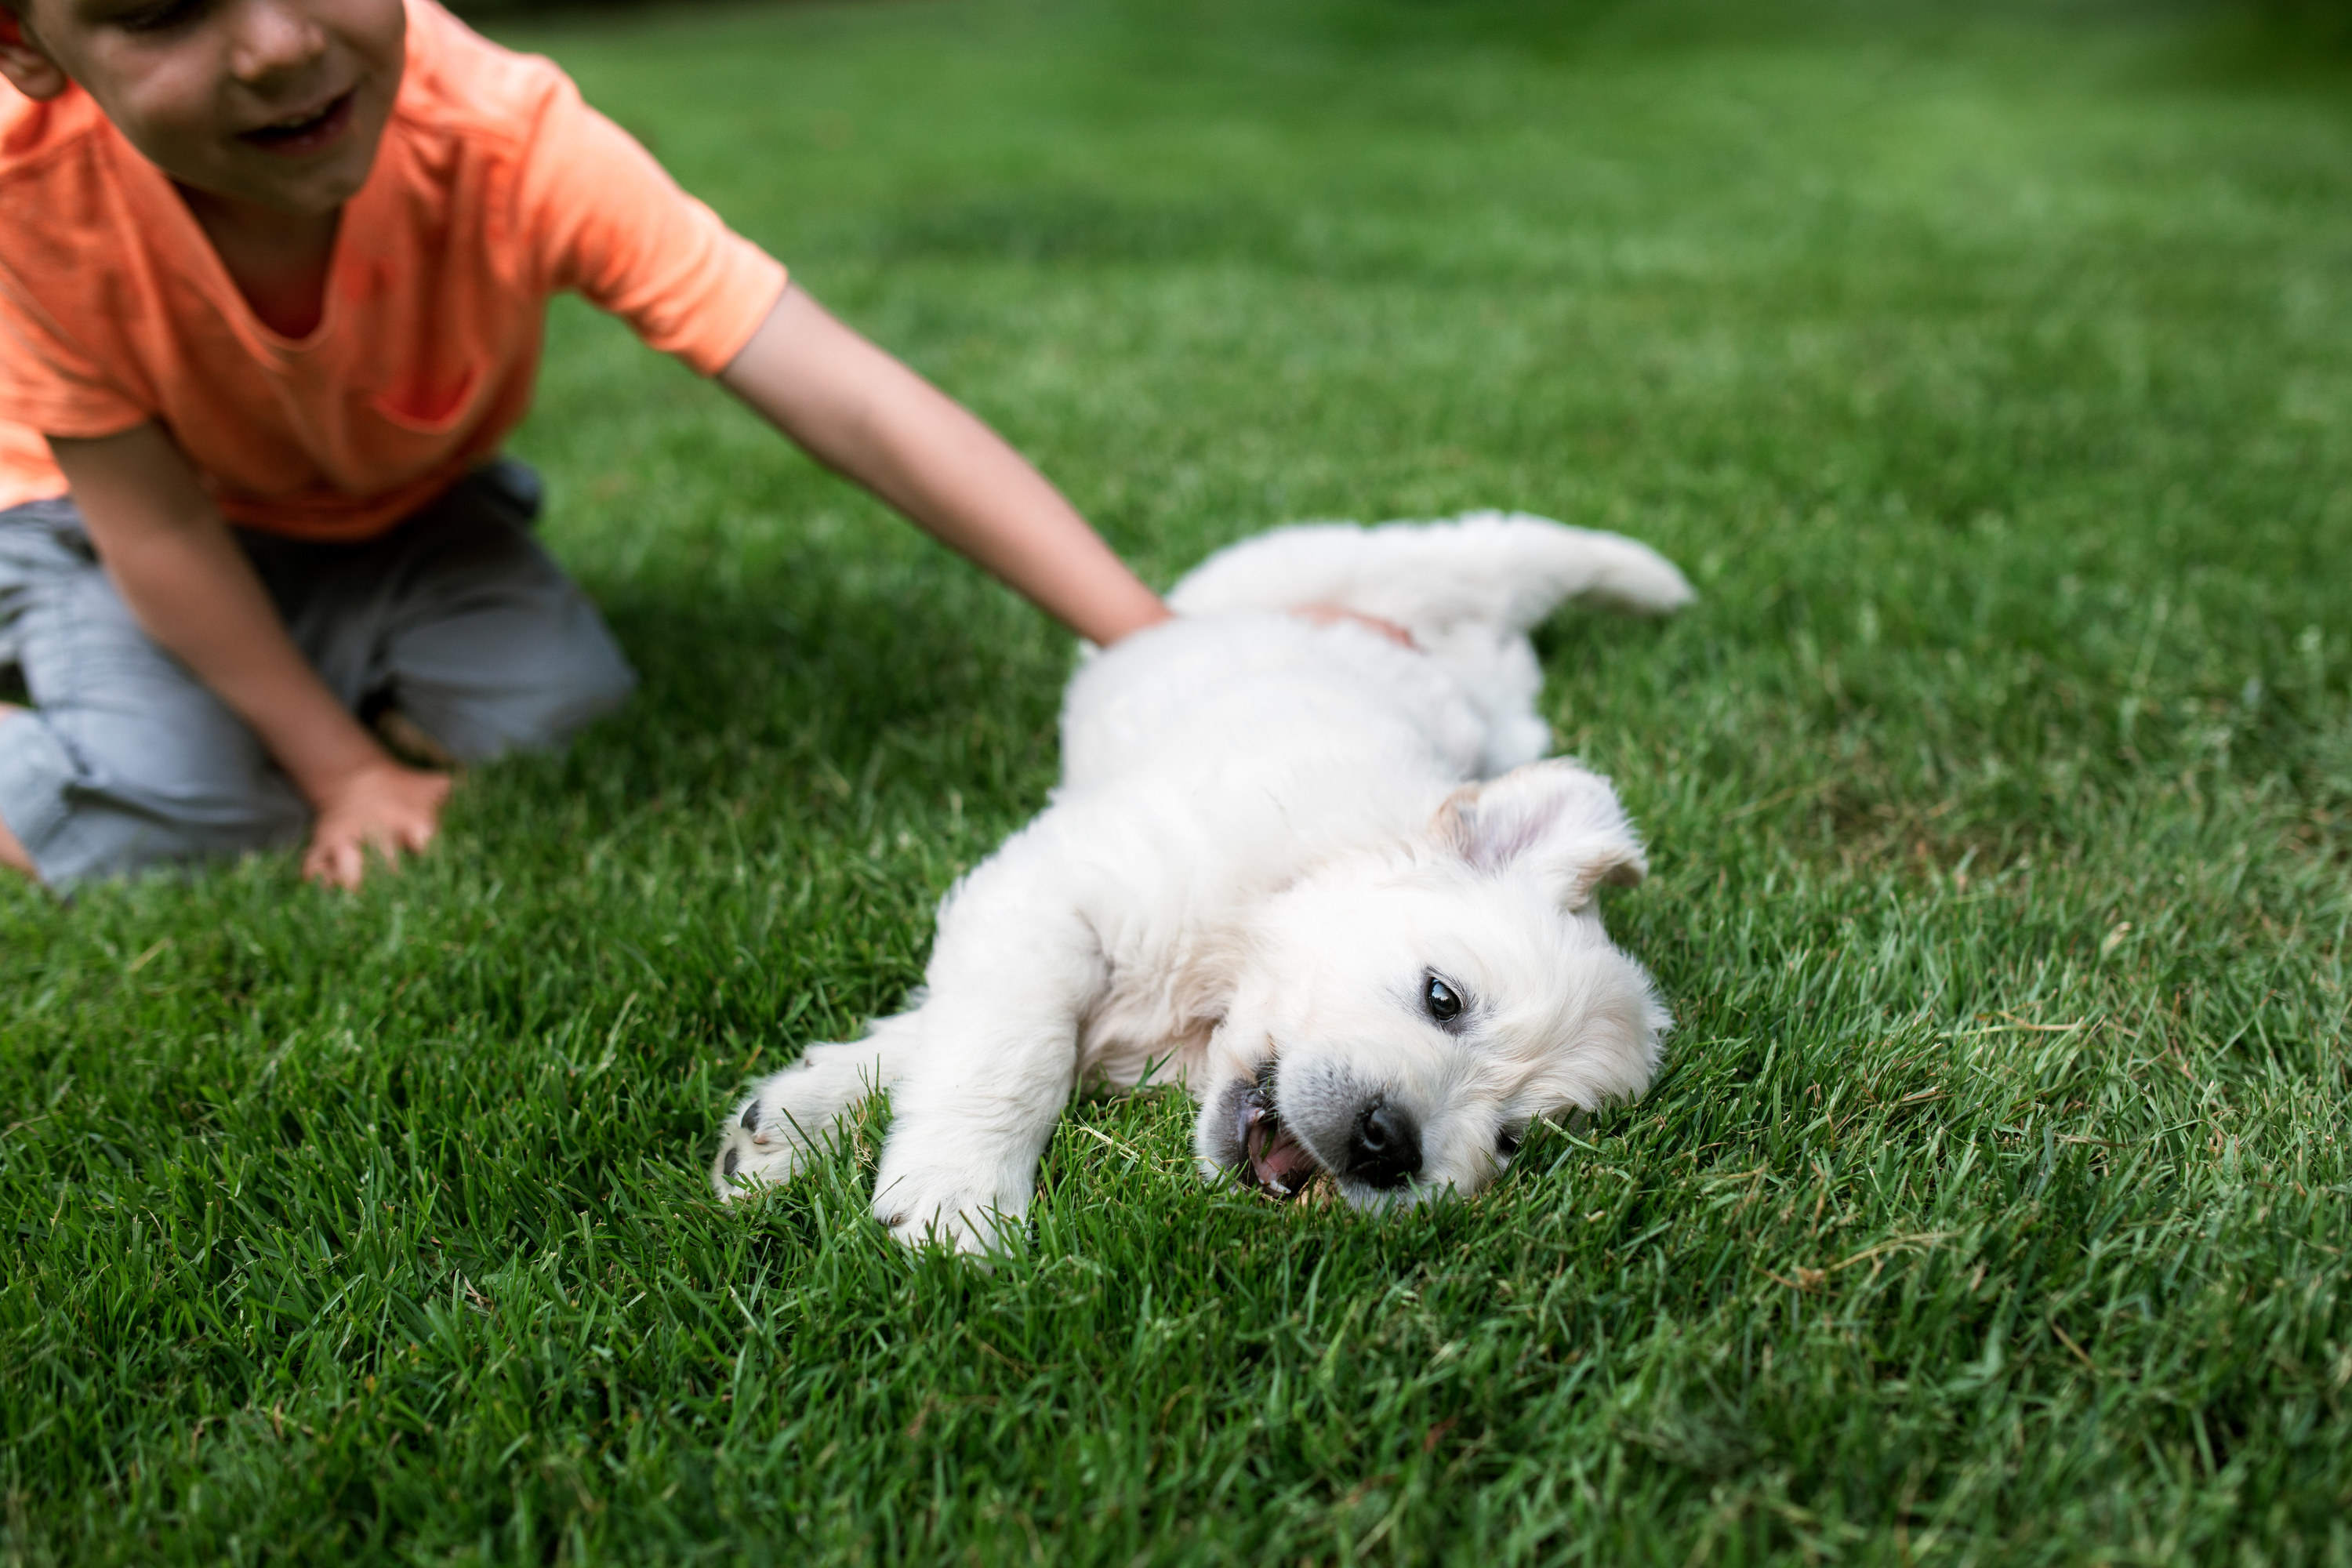 A white golden retriever plays with a young child in the grass